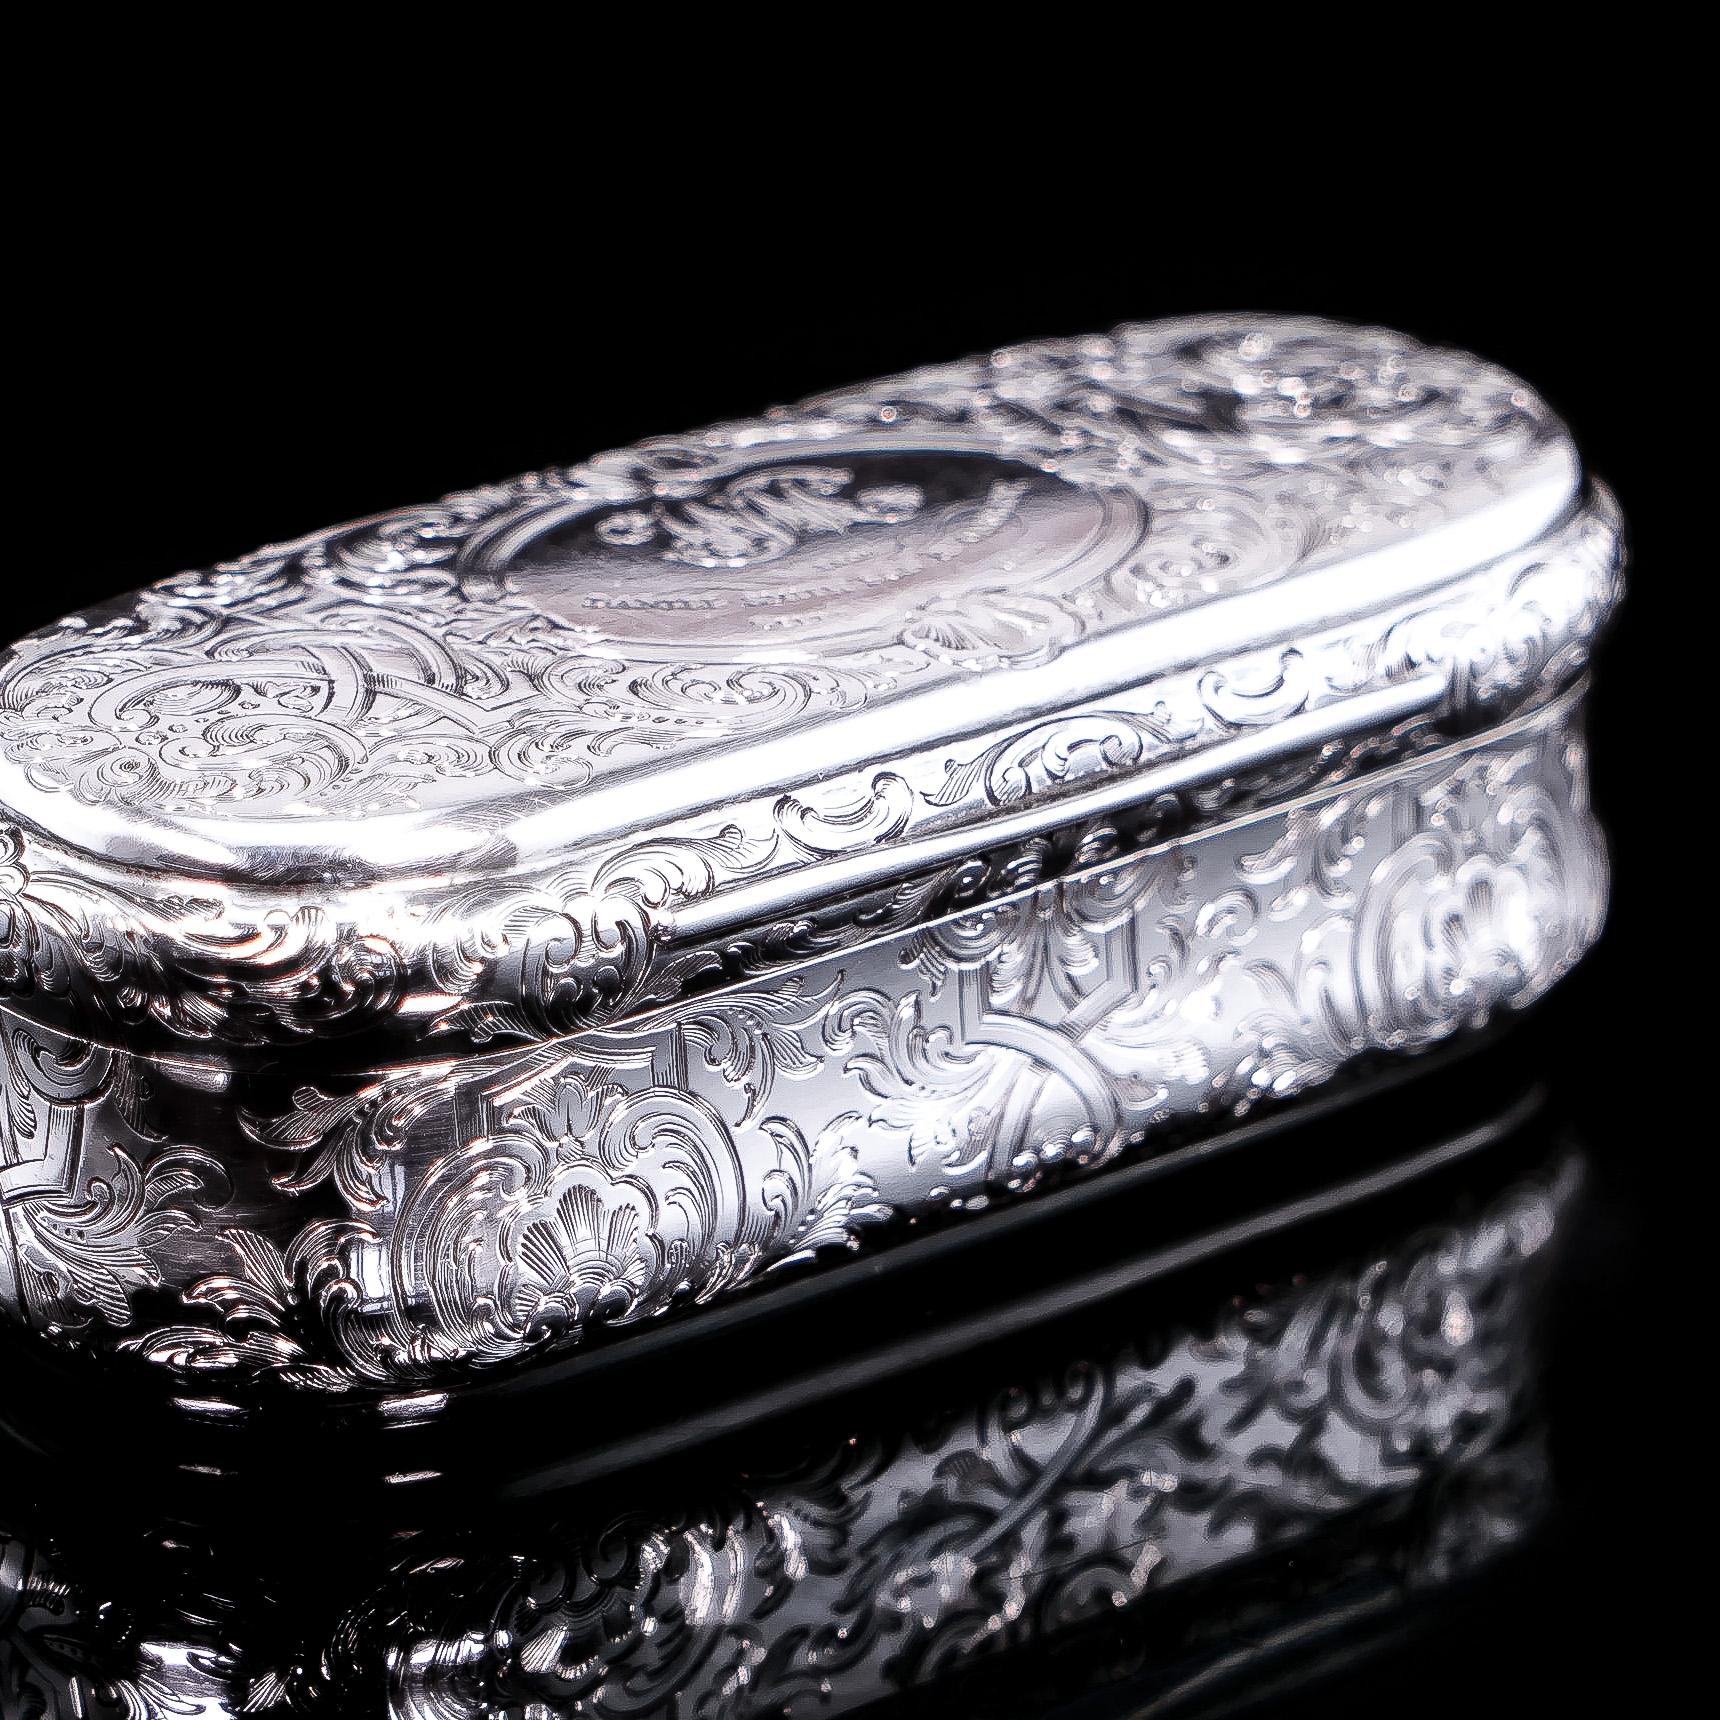 We are delighted to offer this beautiful Victorian solid silver snuff box with the marks of Charles Rawlings & William Summers, London 1849.
 
The box is made from a very good gauge of silver with a hefty weight in hand especially considering its